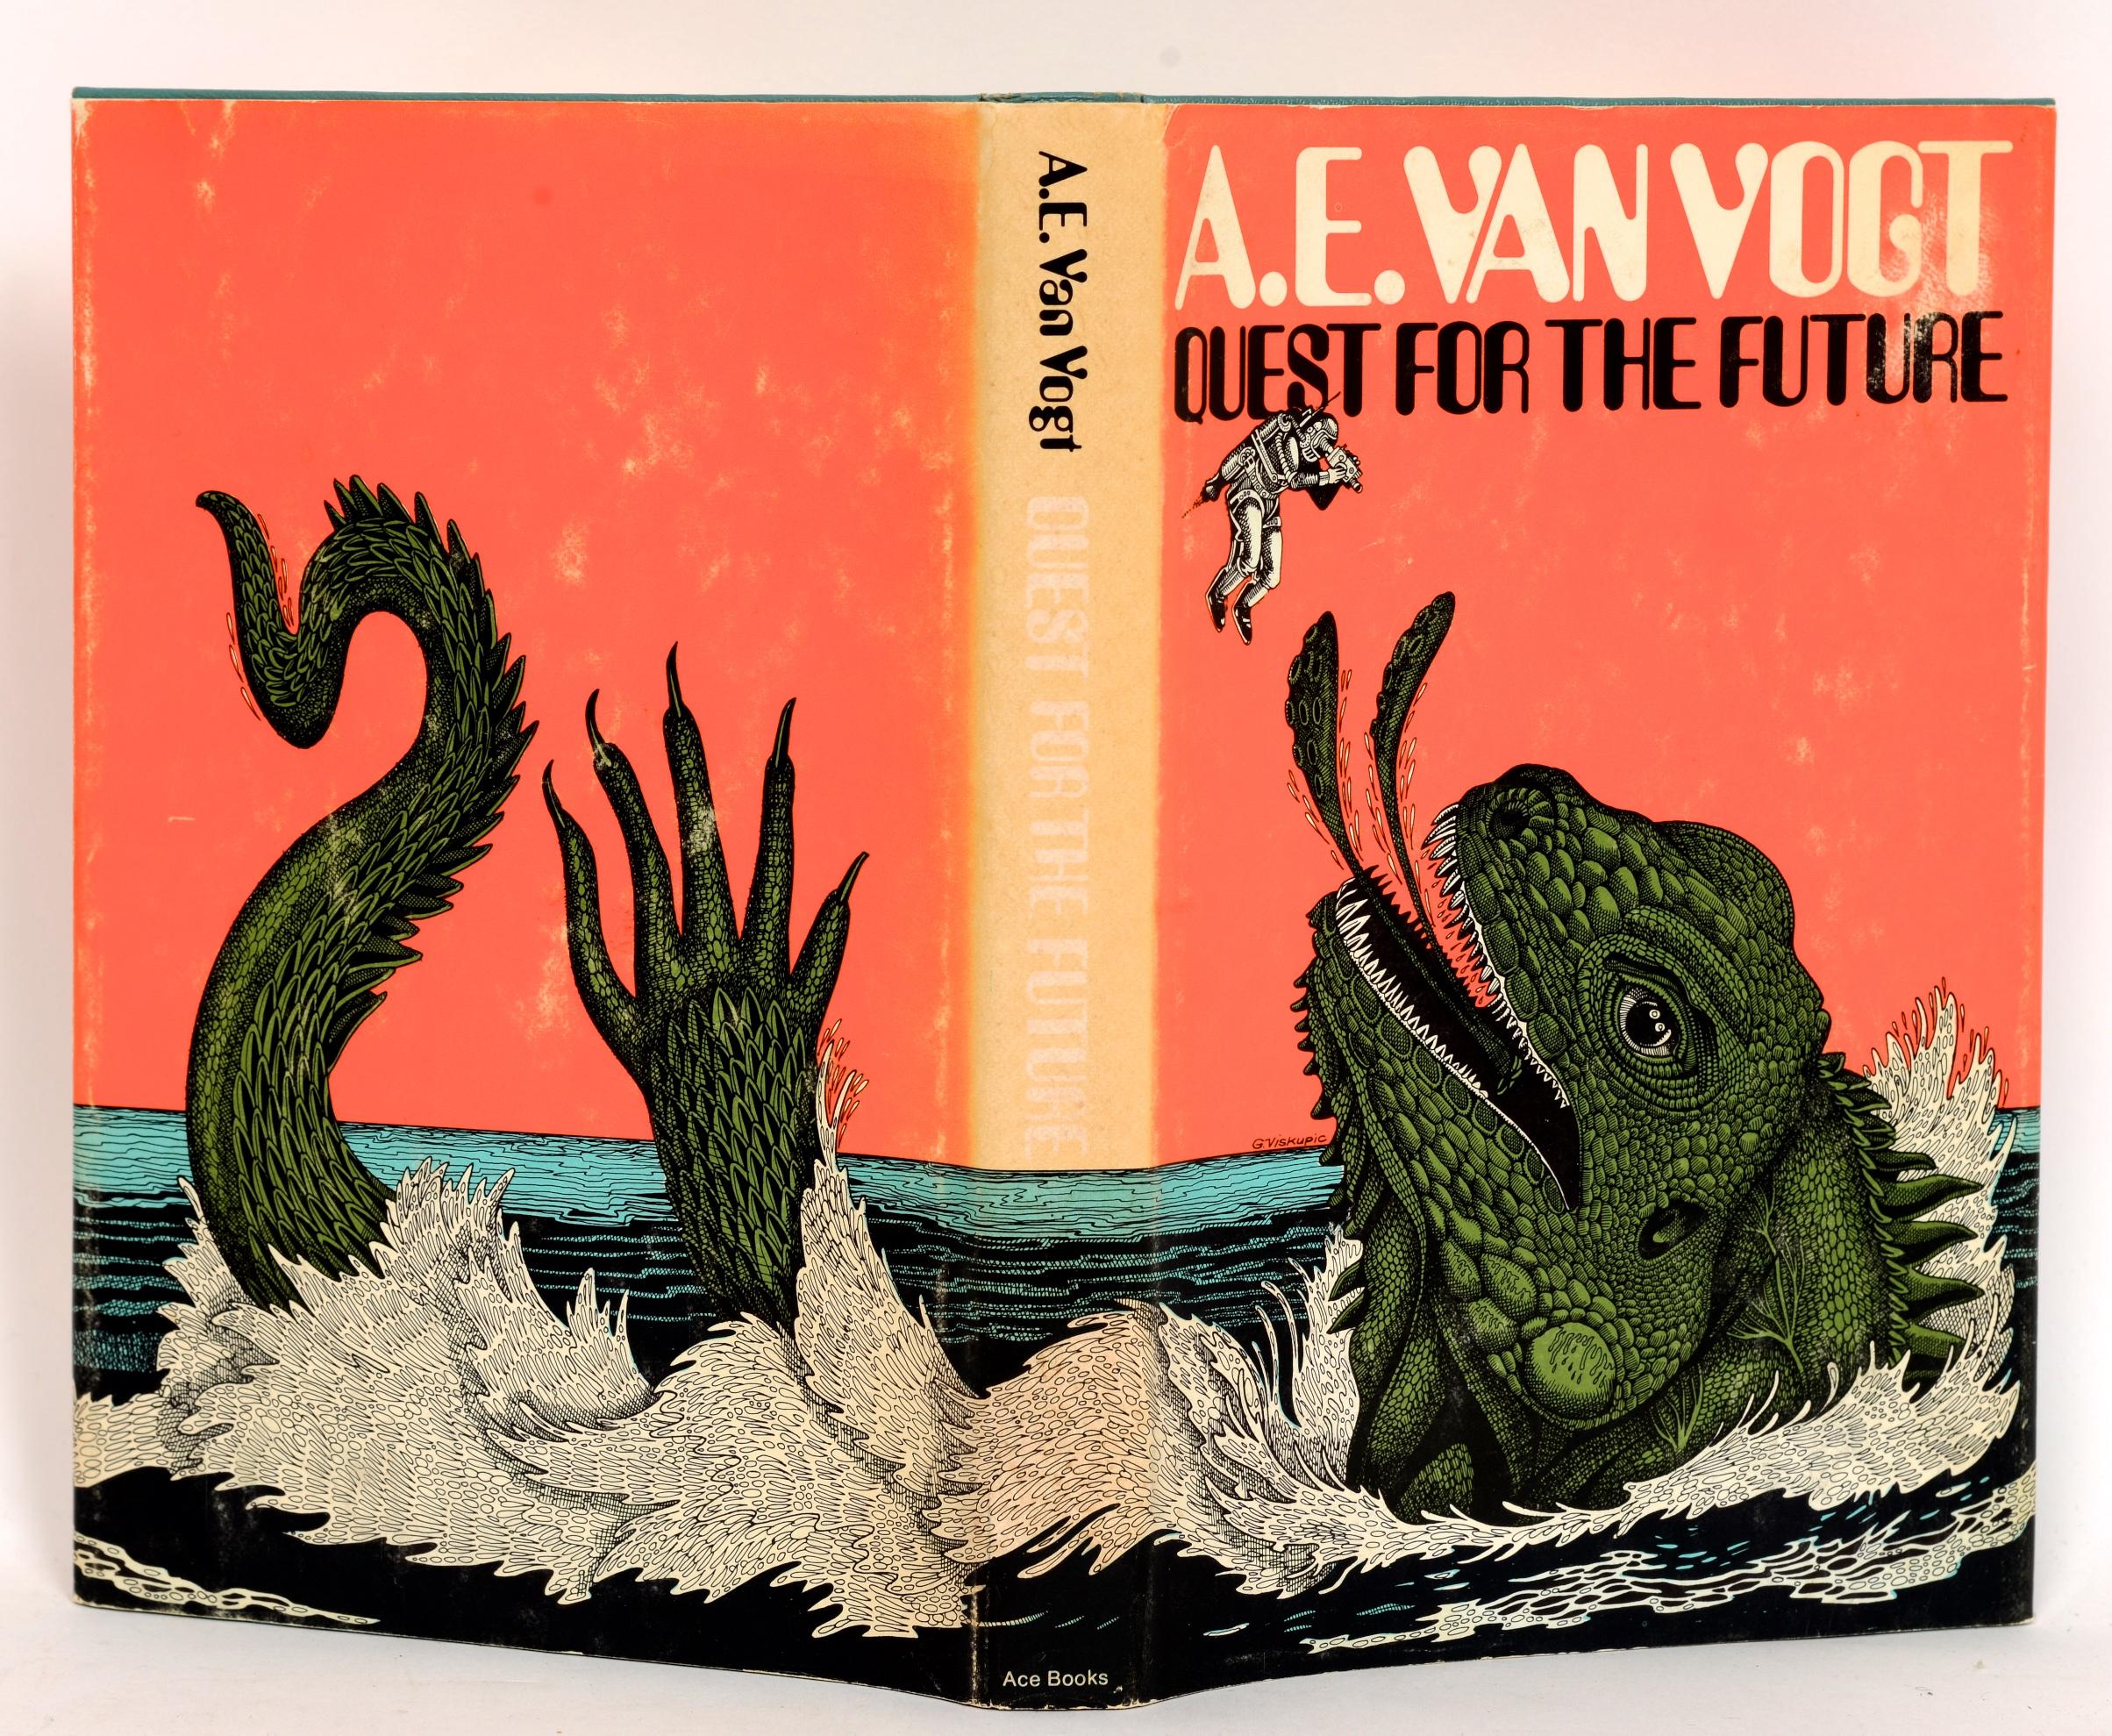 Quest for the Future by A. E. Van Vogt. Ace Books, New York, 1970. First edtion hardcover BCE with dust jacket. He was one of the most popular and prolific science fiction writers during the 1940s. He produced more than 40 short stories and 5